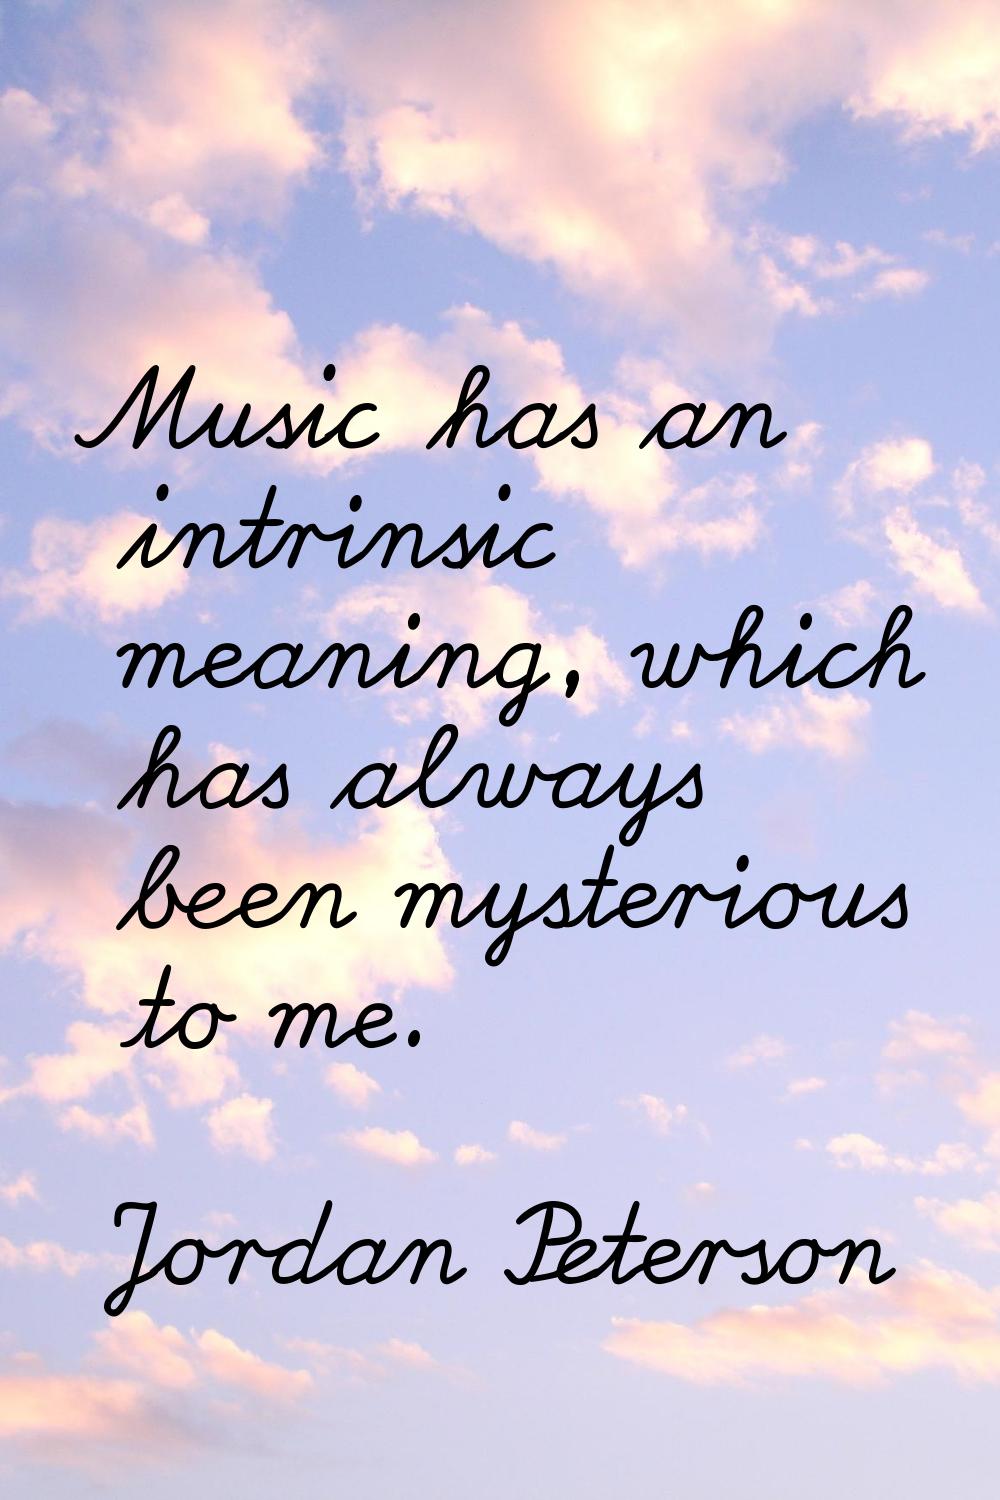 Music has an intrinsic meaning, which has always been mysterious to me.